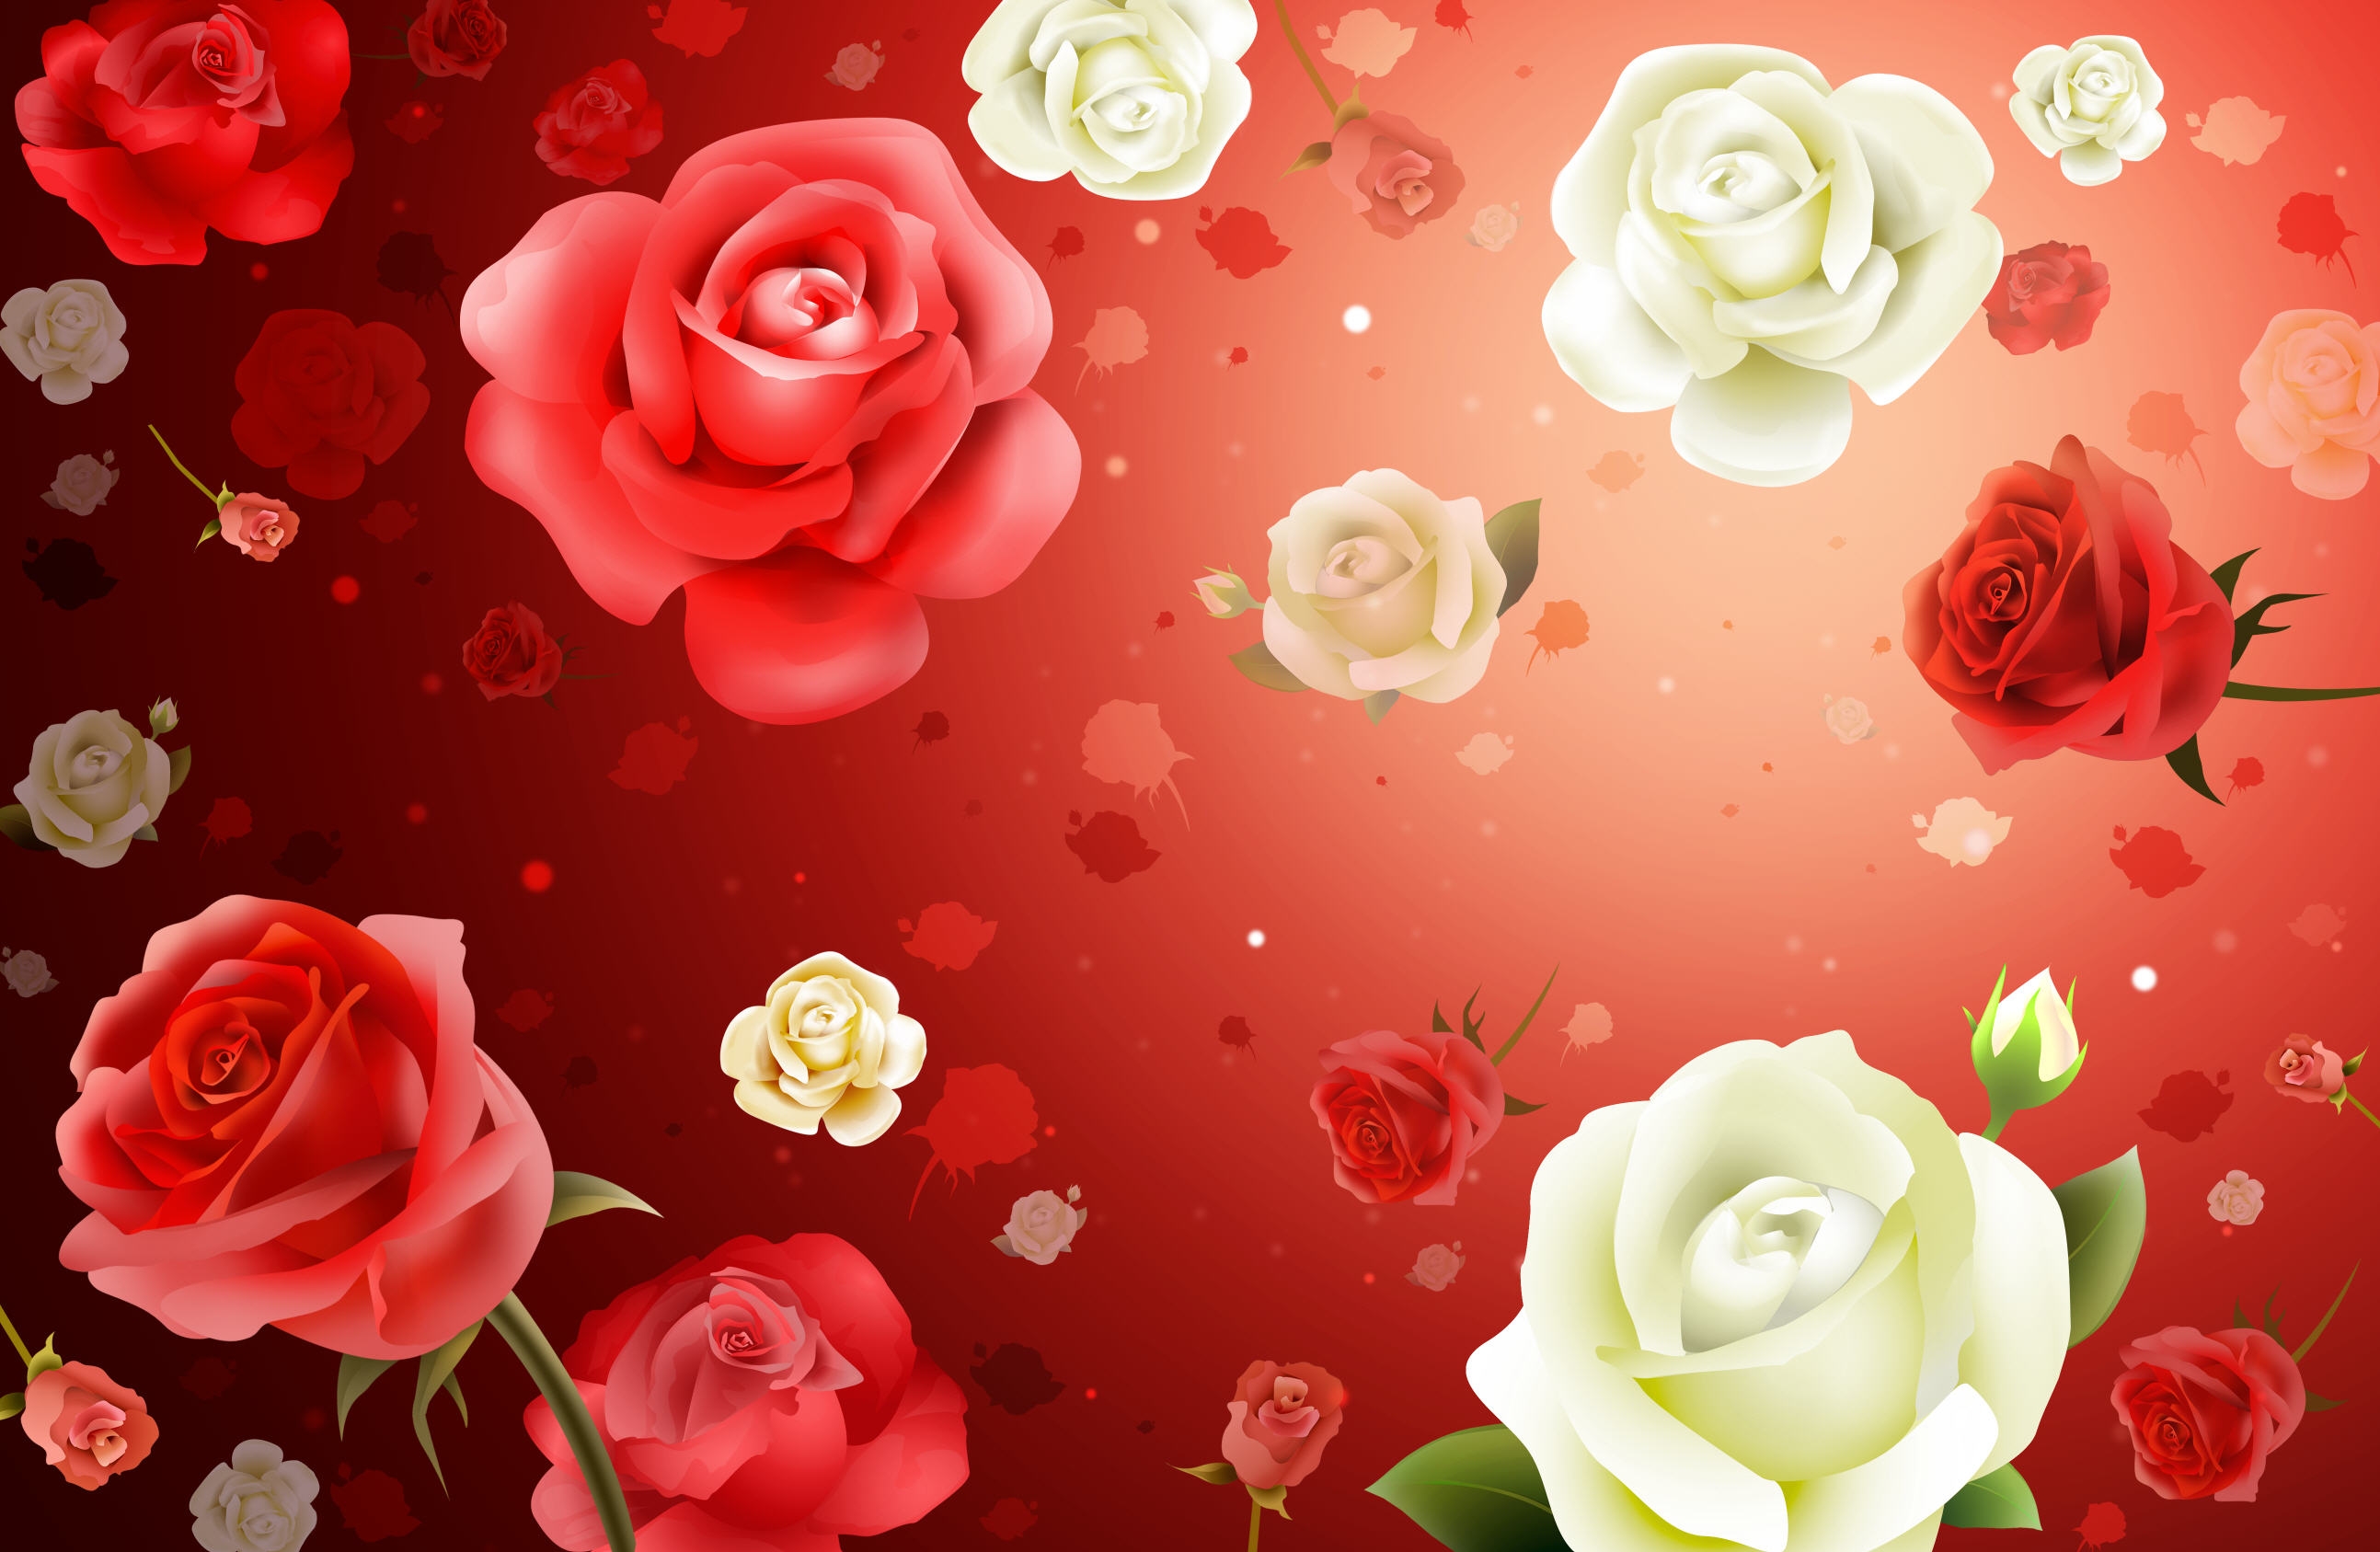 background, roses, textures, flowers, texture iphone wallpaper